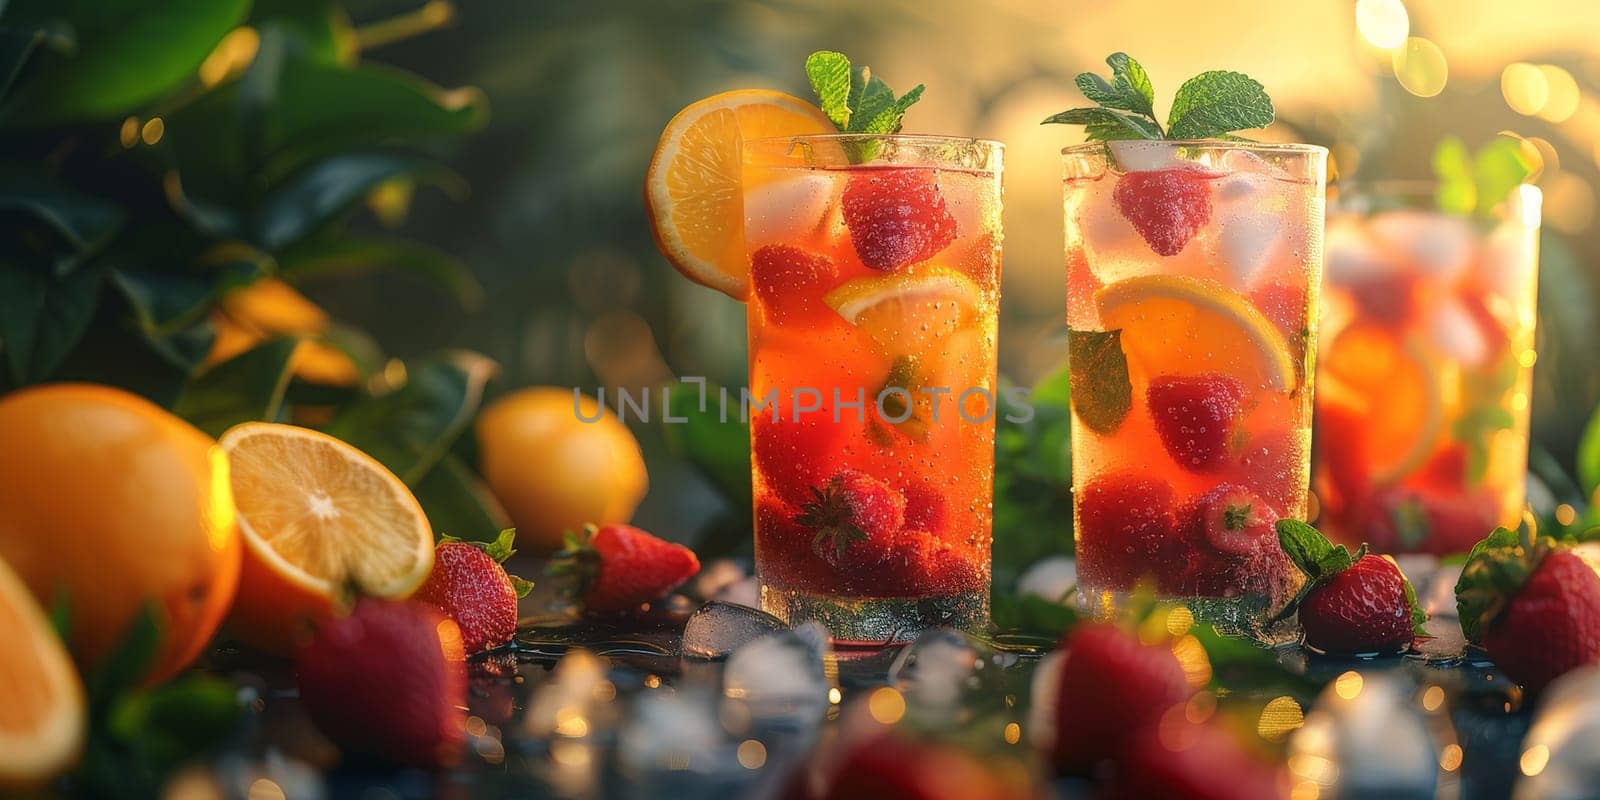 A glass of fruit punch with a strawberry garnish sits on a table next to a glass of fruit punch with a strawberry garnish